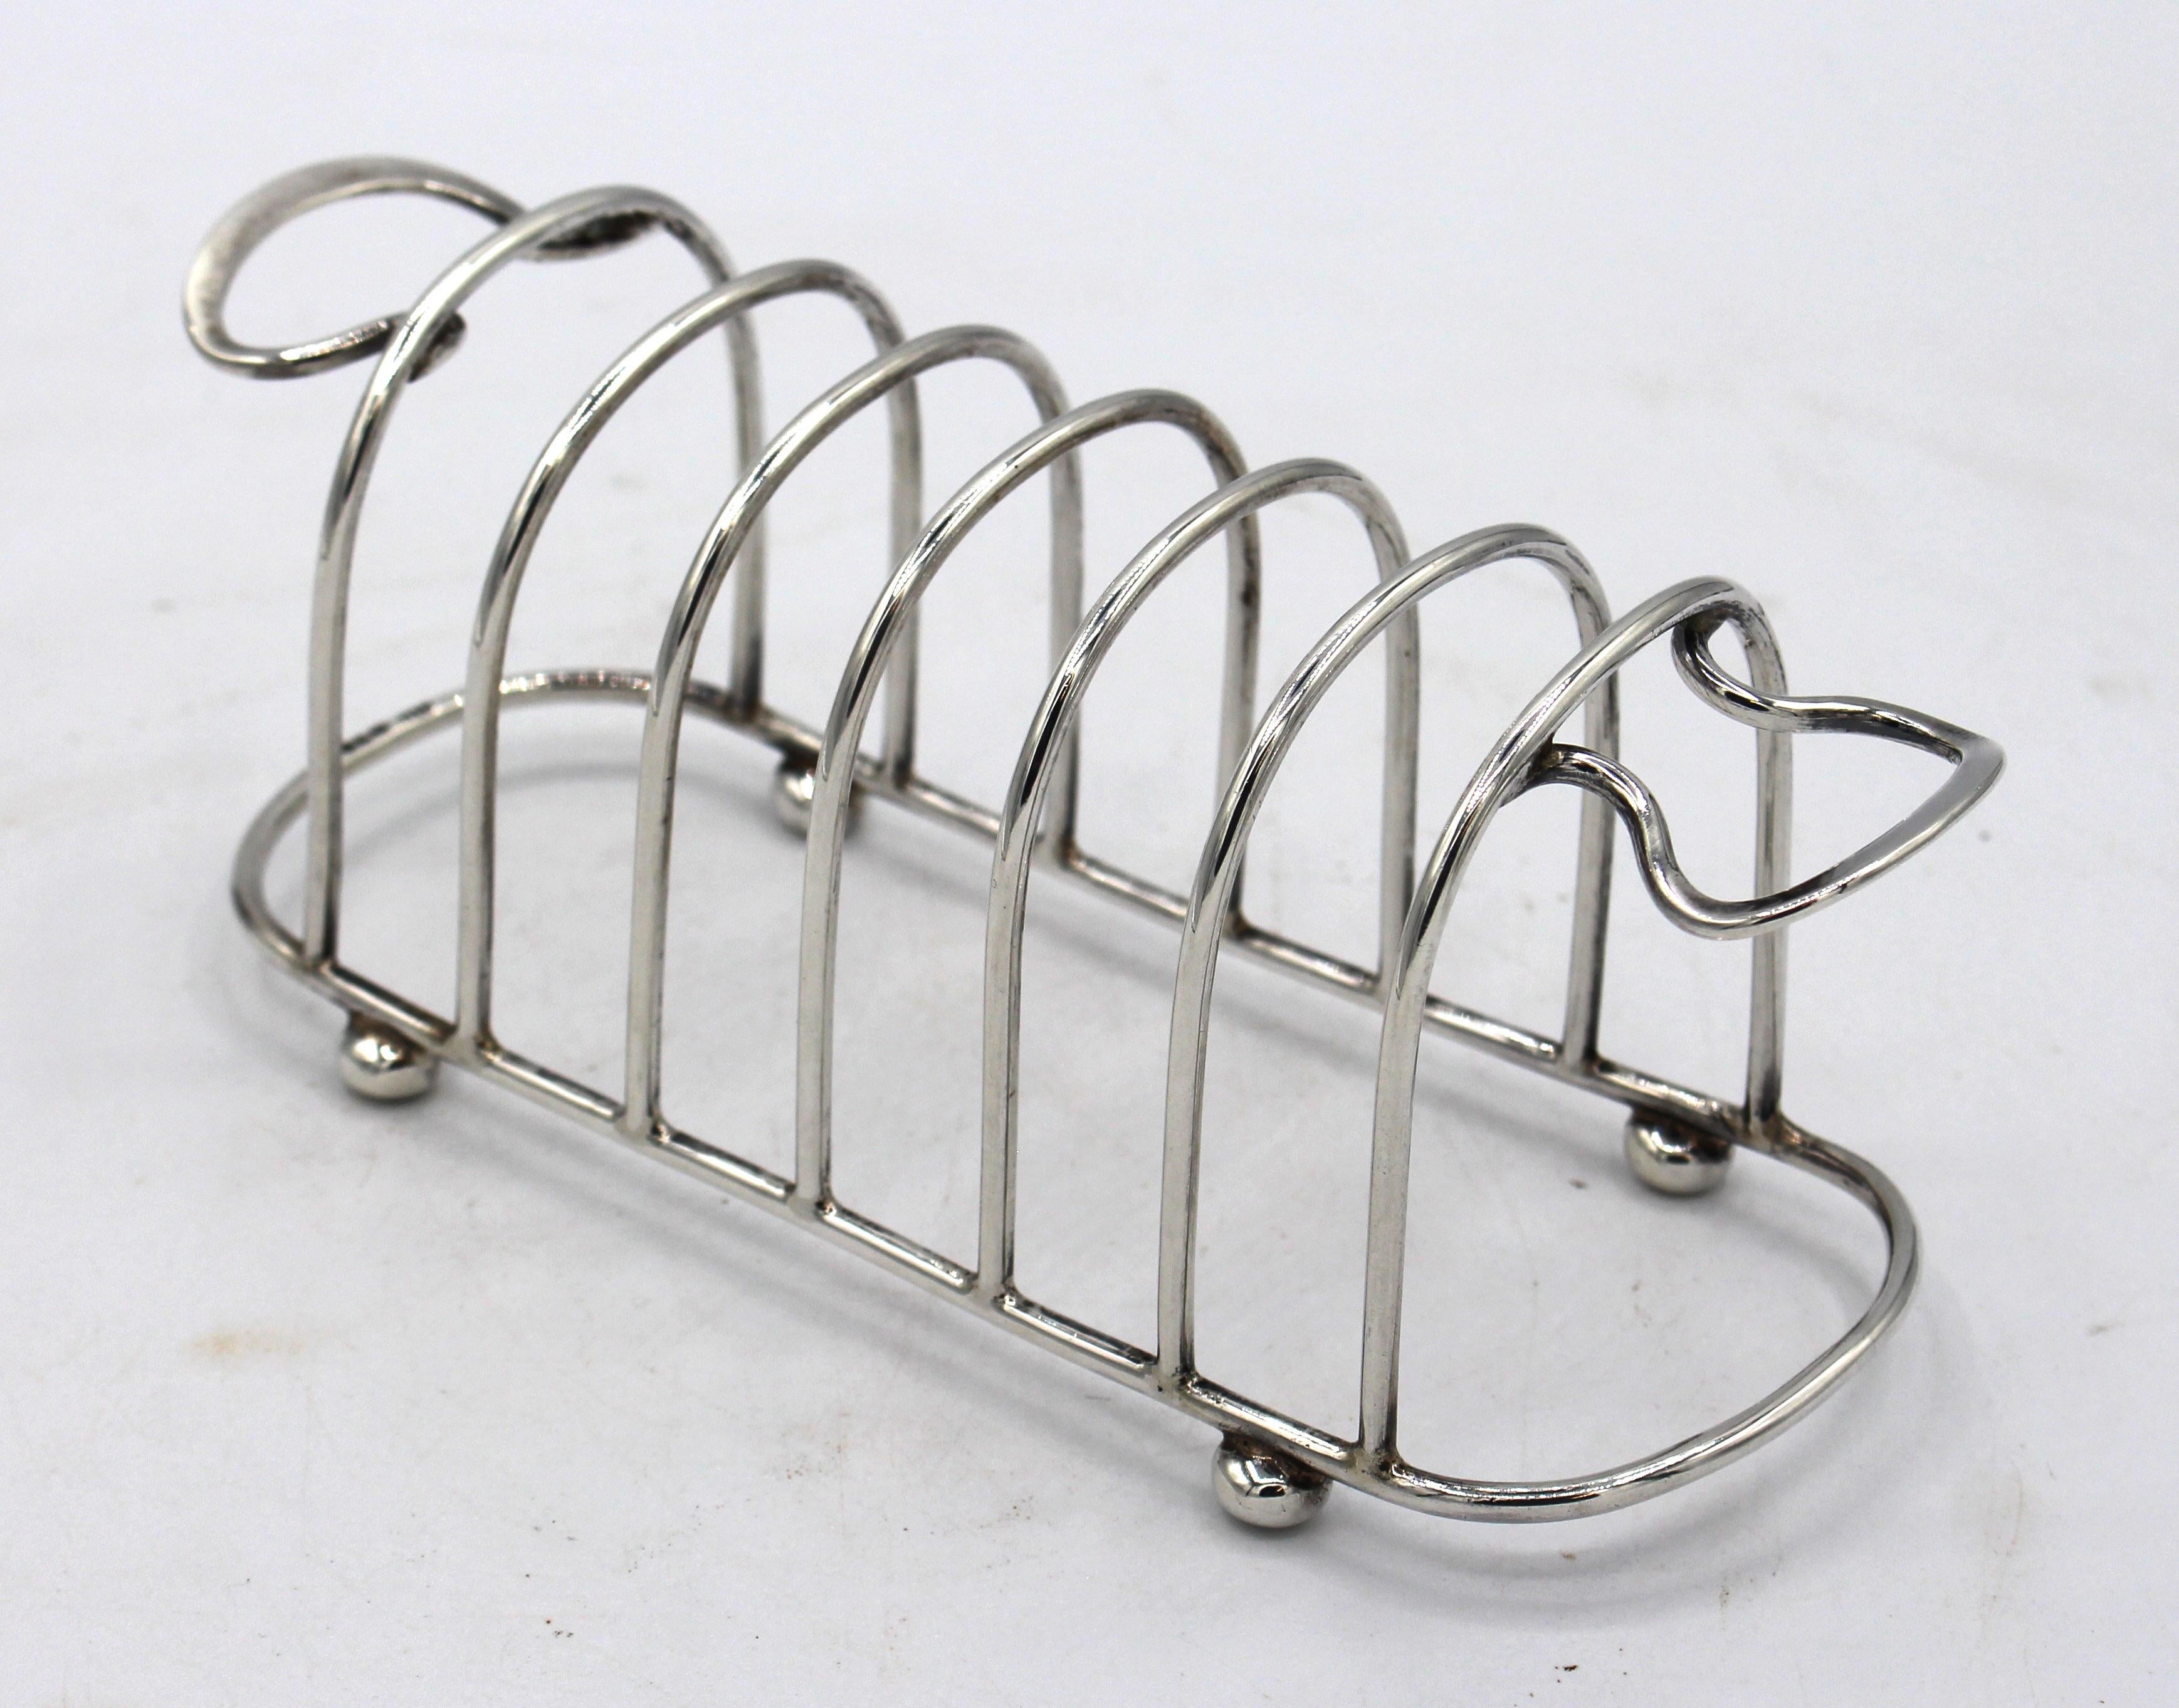 Sterling silver toast rack, Chester, England, 1910, by George Unite & Sons. Post-1902 mark. Edward VII period. Ball feet. 3.45 troy oz.
6 5/16